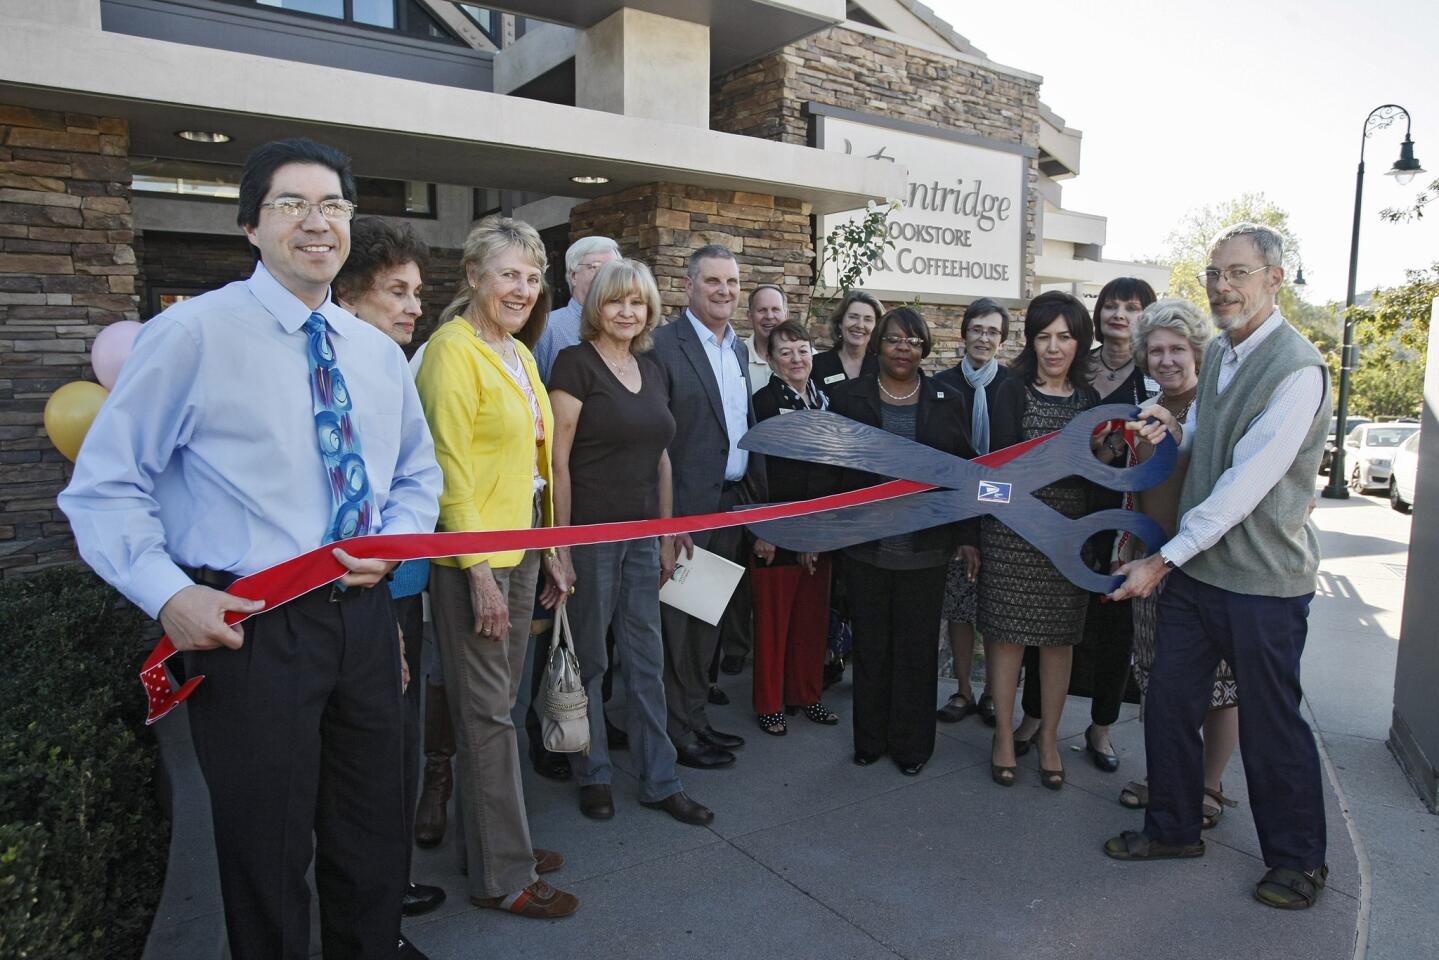 Photo Gallery: First Village Post Office within 35,000 sq. miles opens in La Canada Flintridge